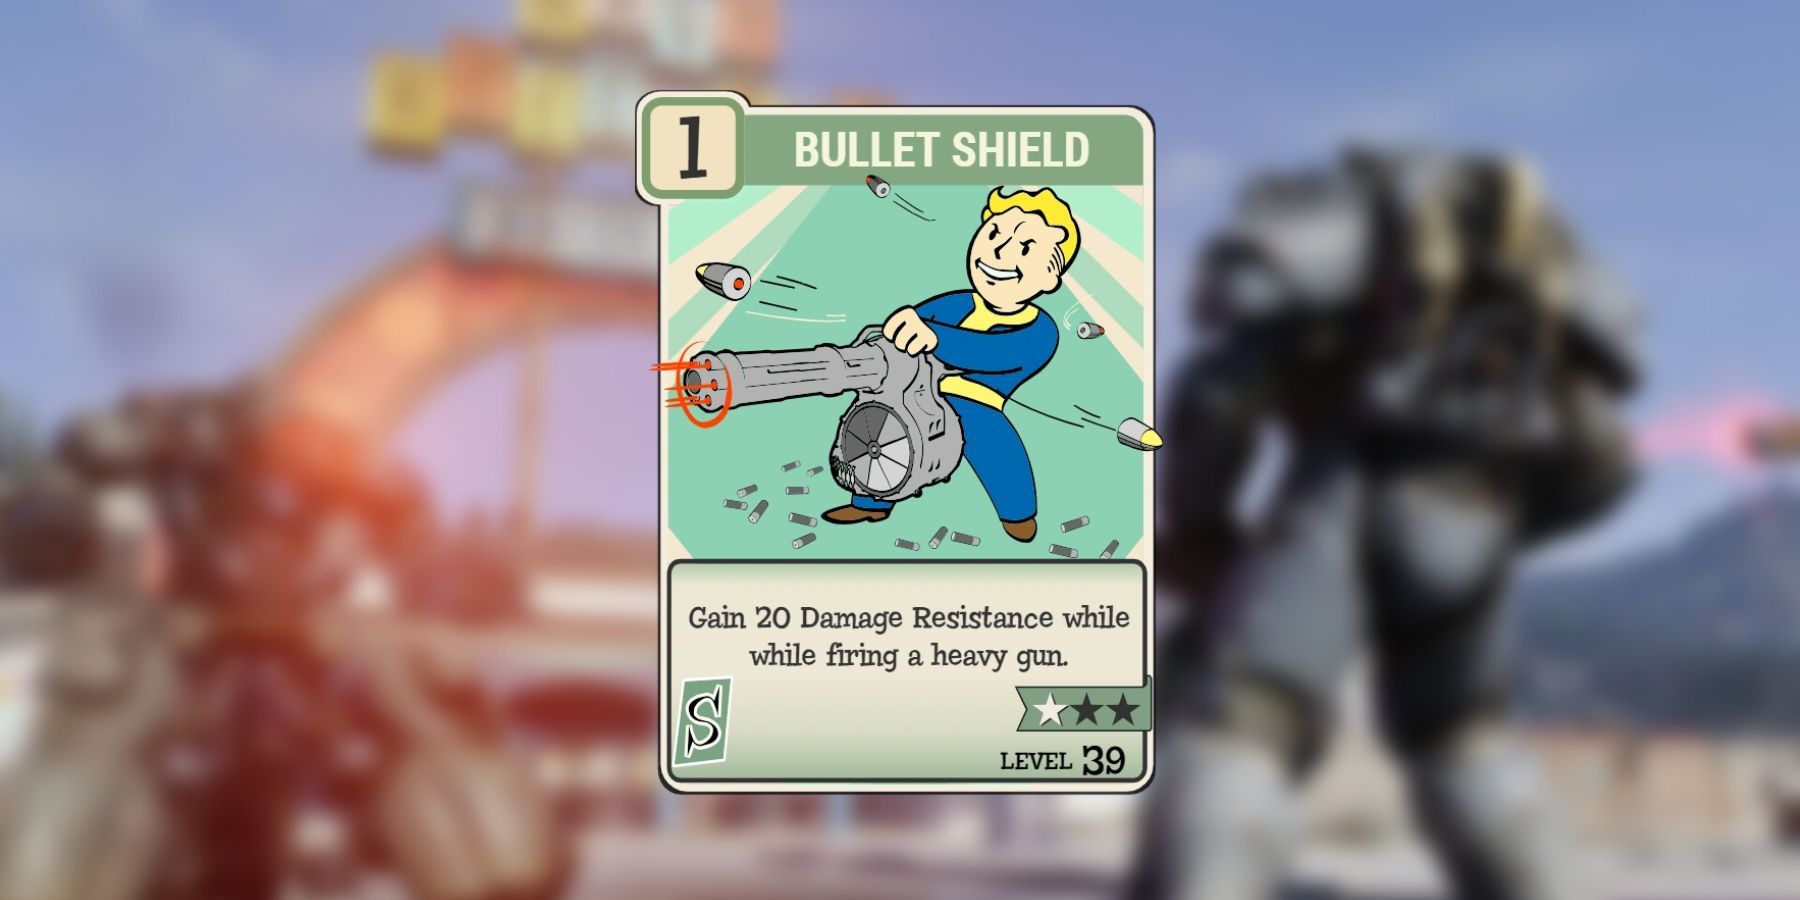 image showing the bullet shield perk card for power armor.